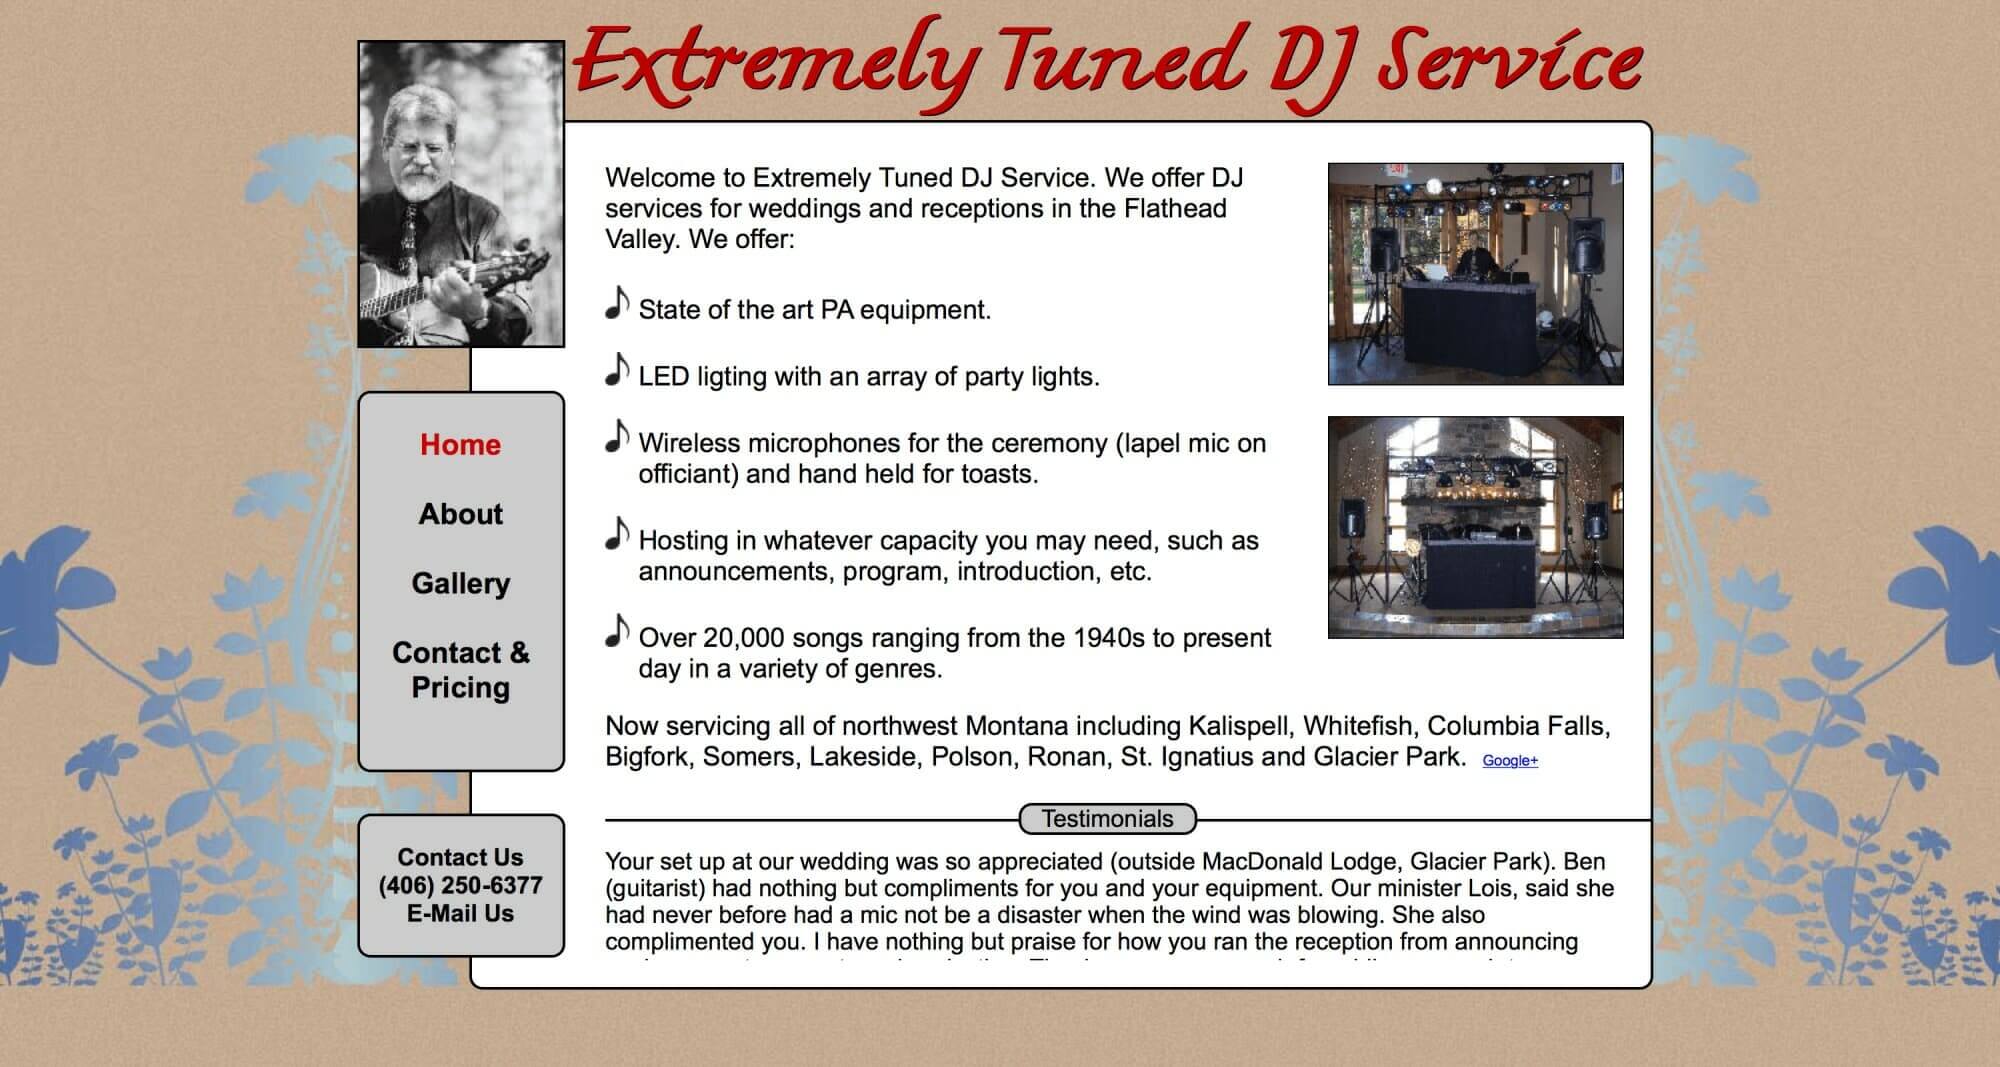 Extremely Tuned DJ Service